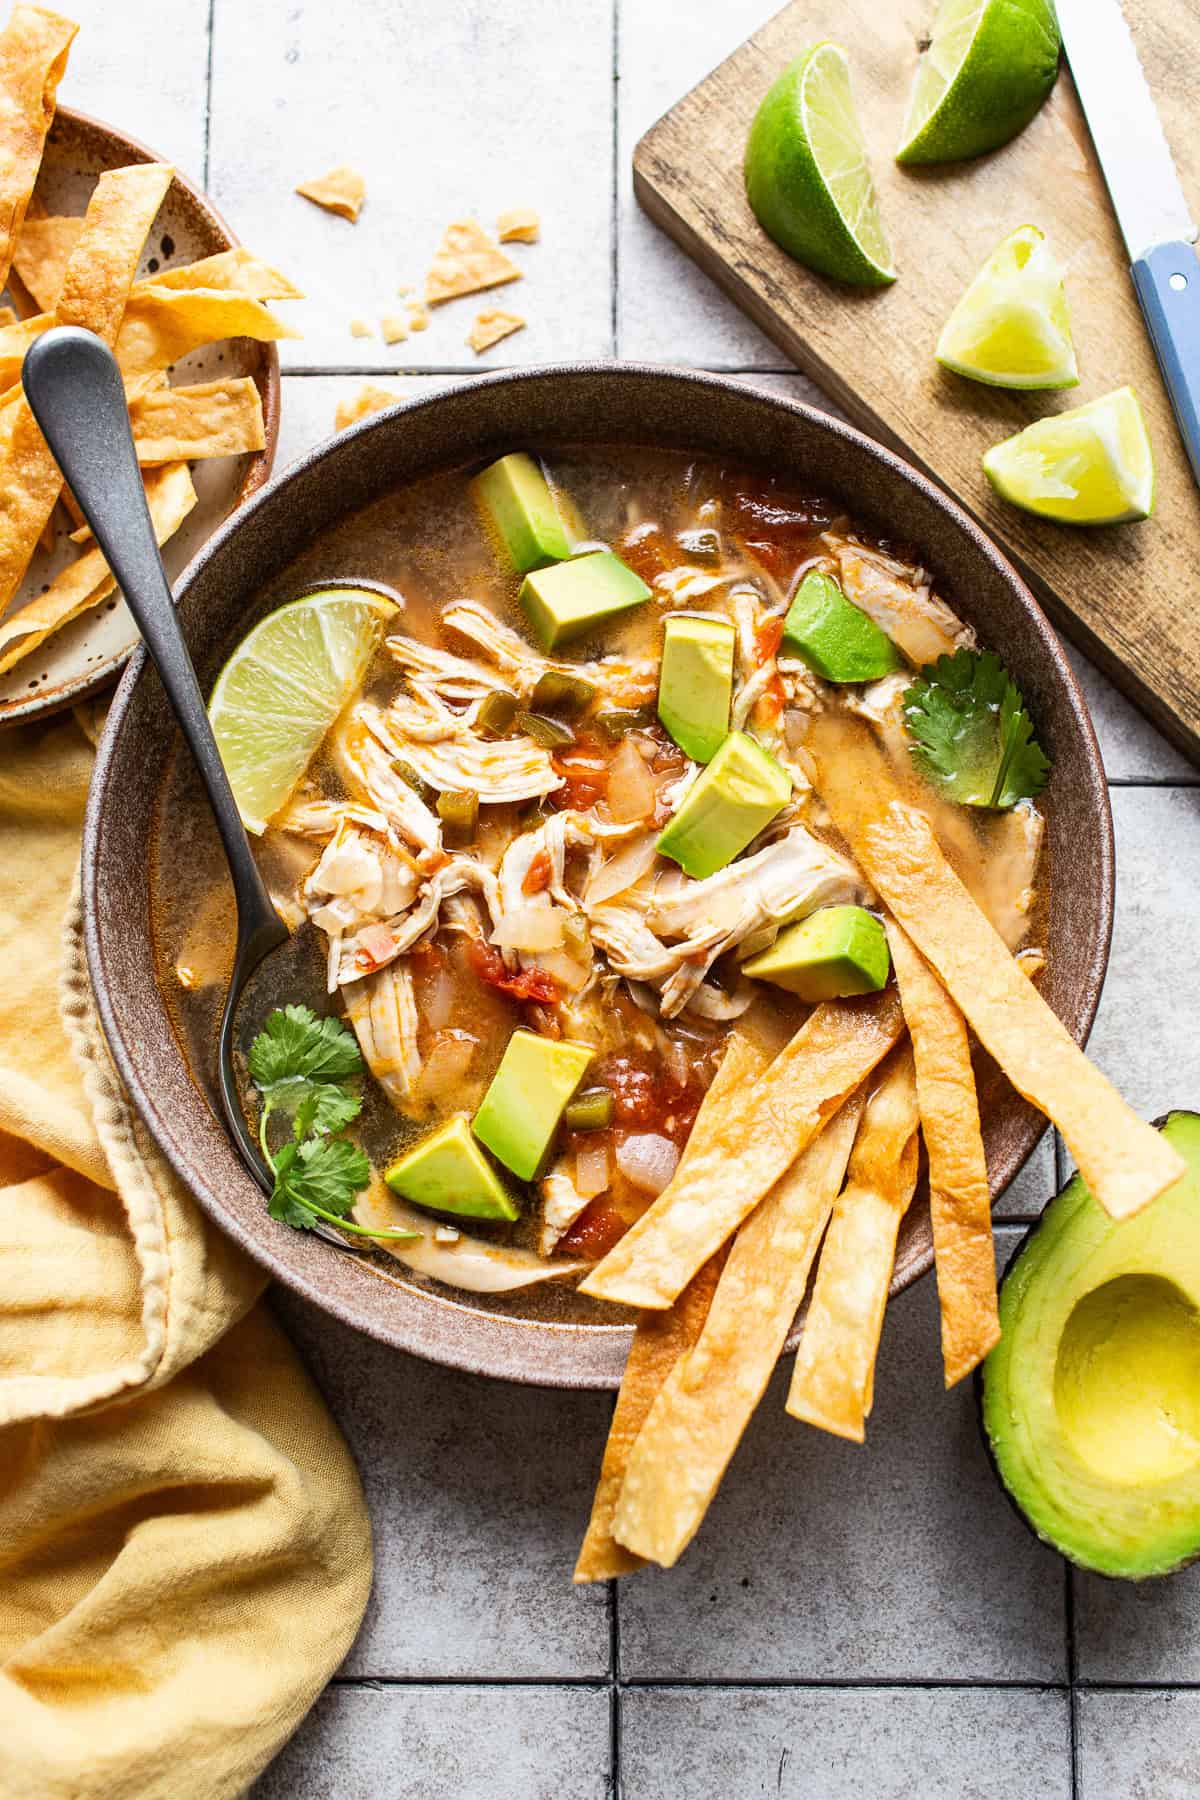 Sopa de lima served in a bowl with limes, diced avocados and tortilla strips. 